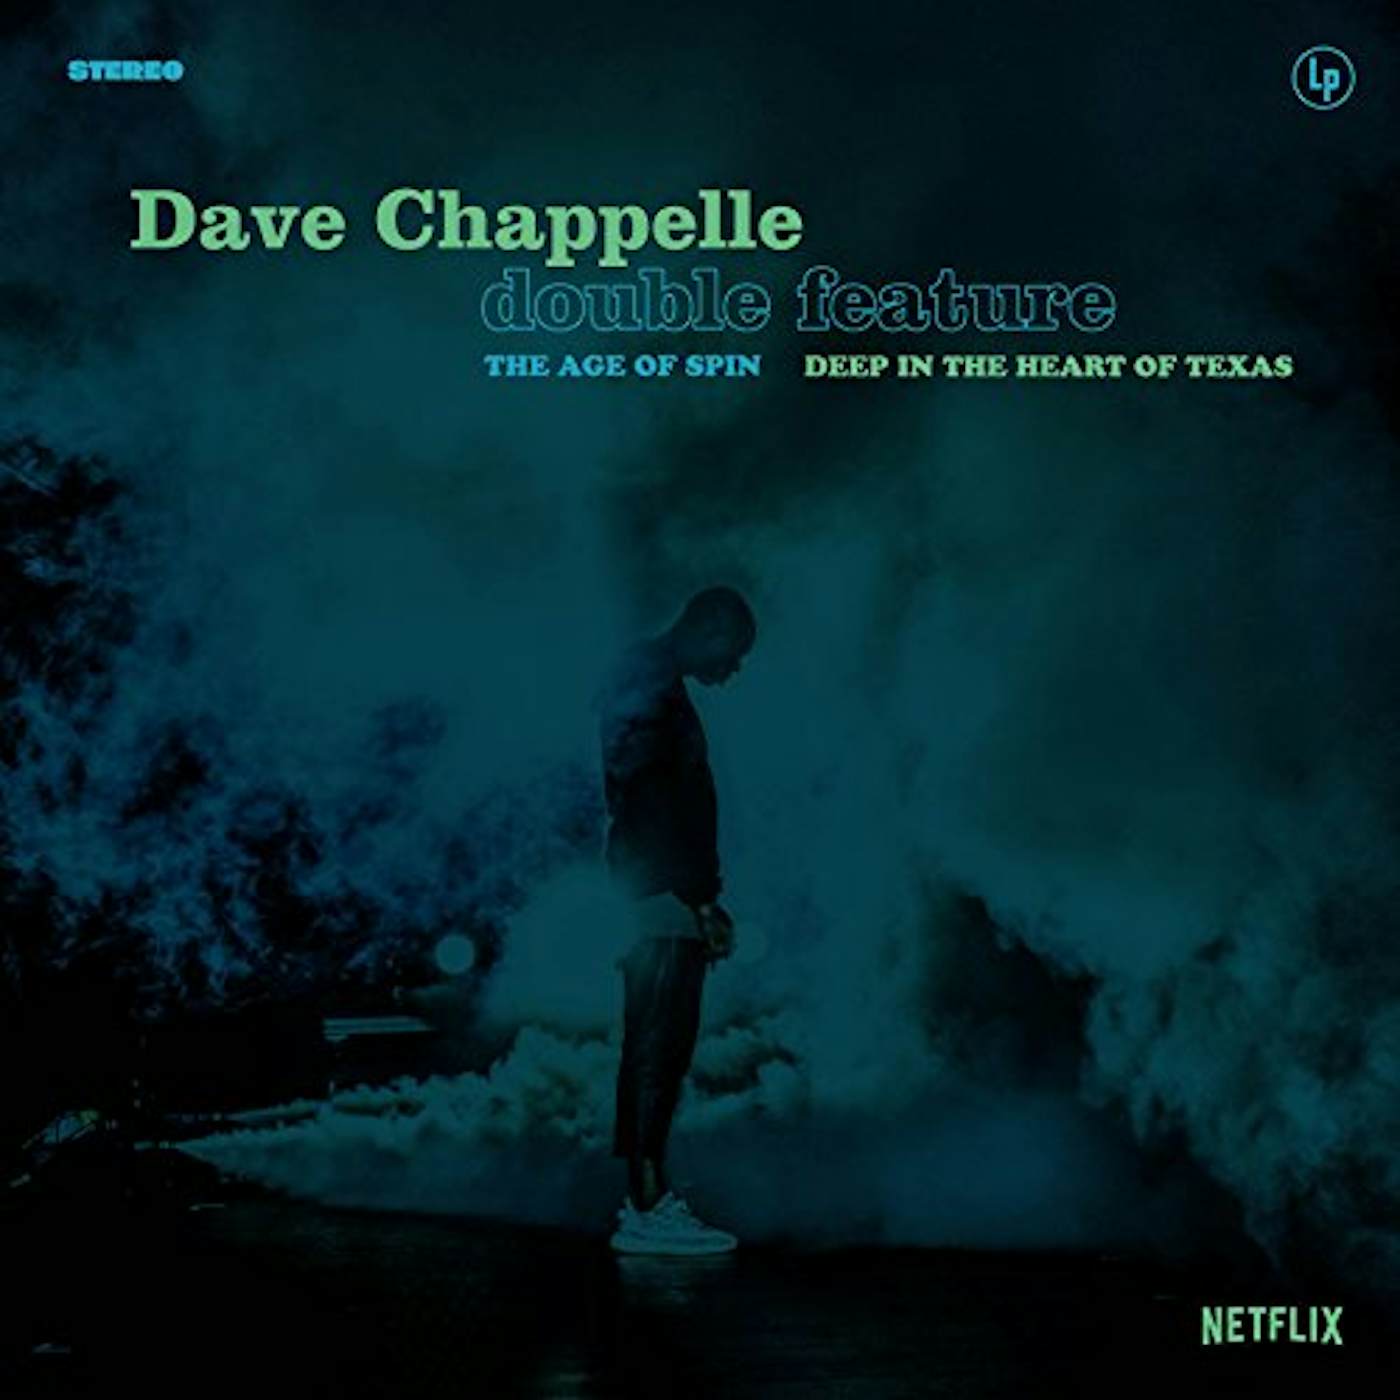 Dave Chappelle AGE OF SPIN & DEEP IN THE HEART OF TEXAS Vinyl Record